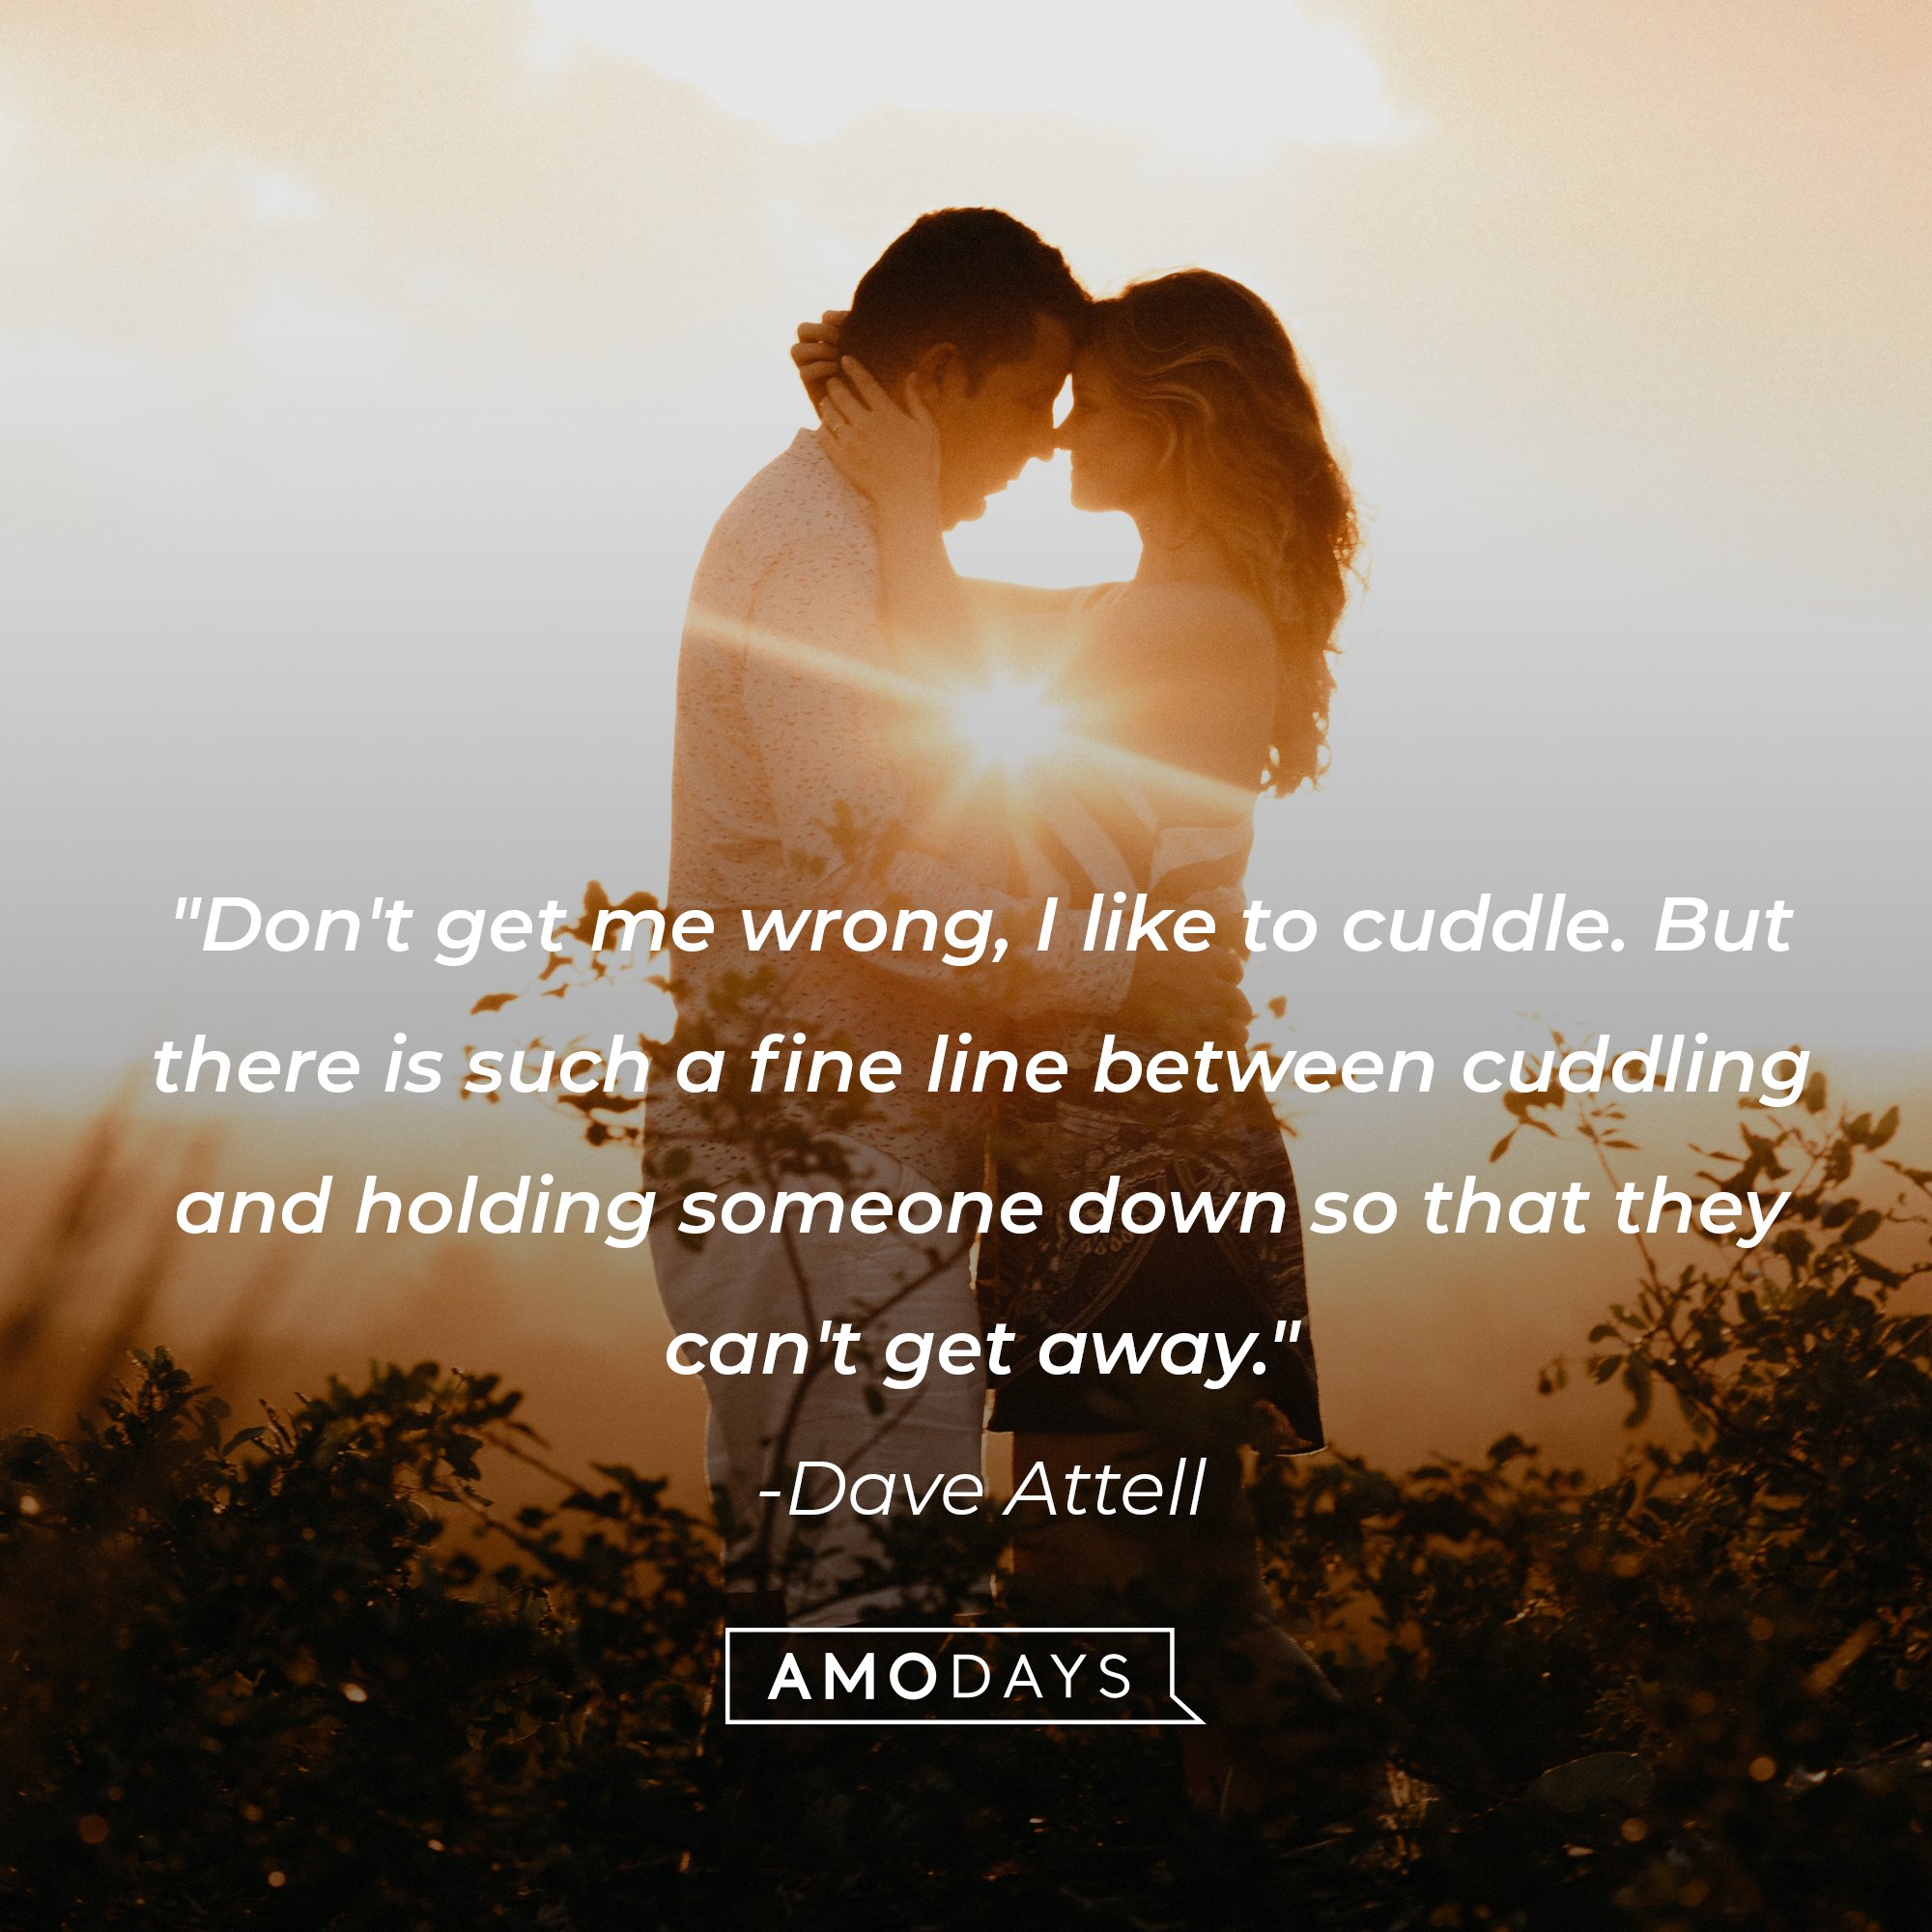 Dave Attell's quote: "Don't get me wrong, I like to cuddle. But there is such a fine line between cuddling and holding someone down so that they can't get away." | Image: AmoDays